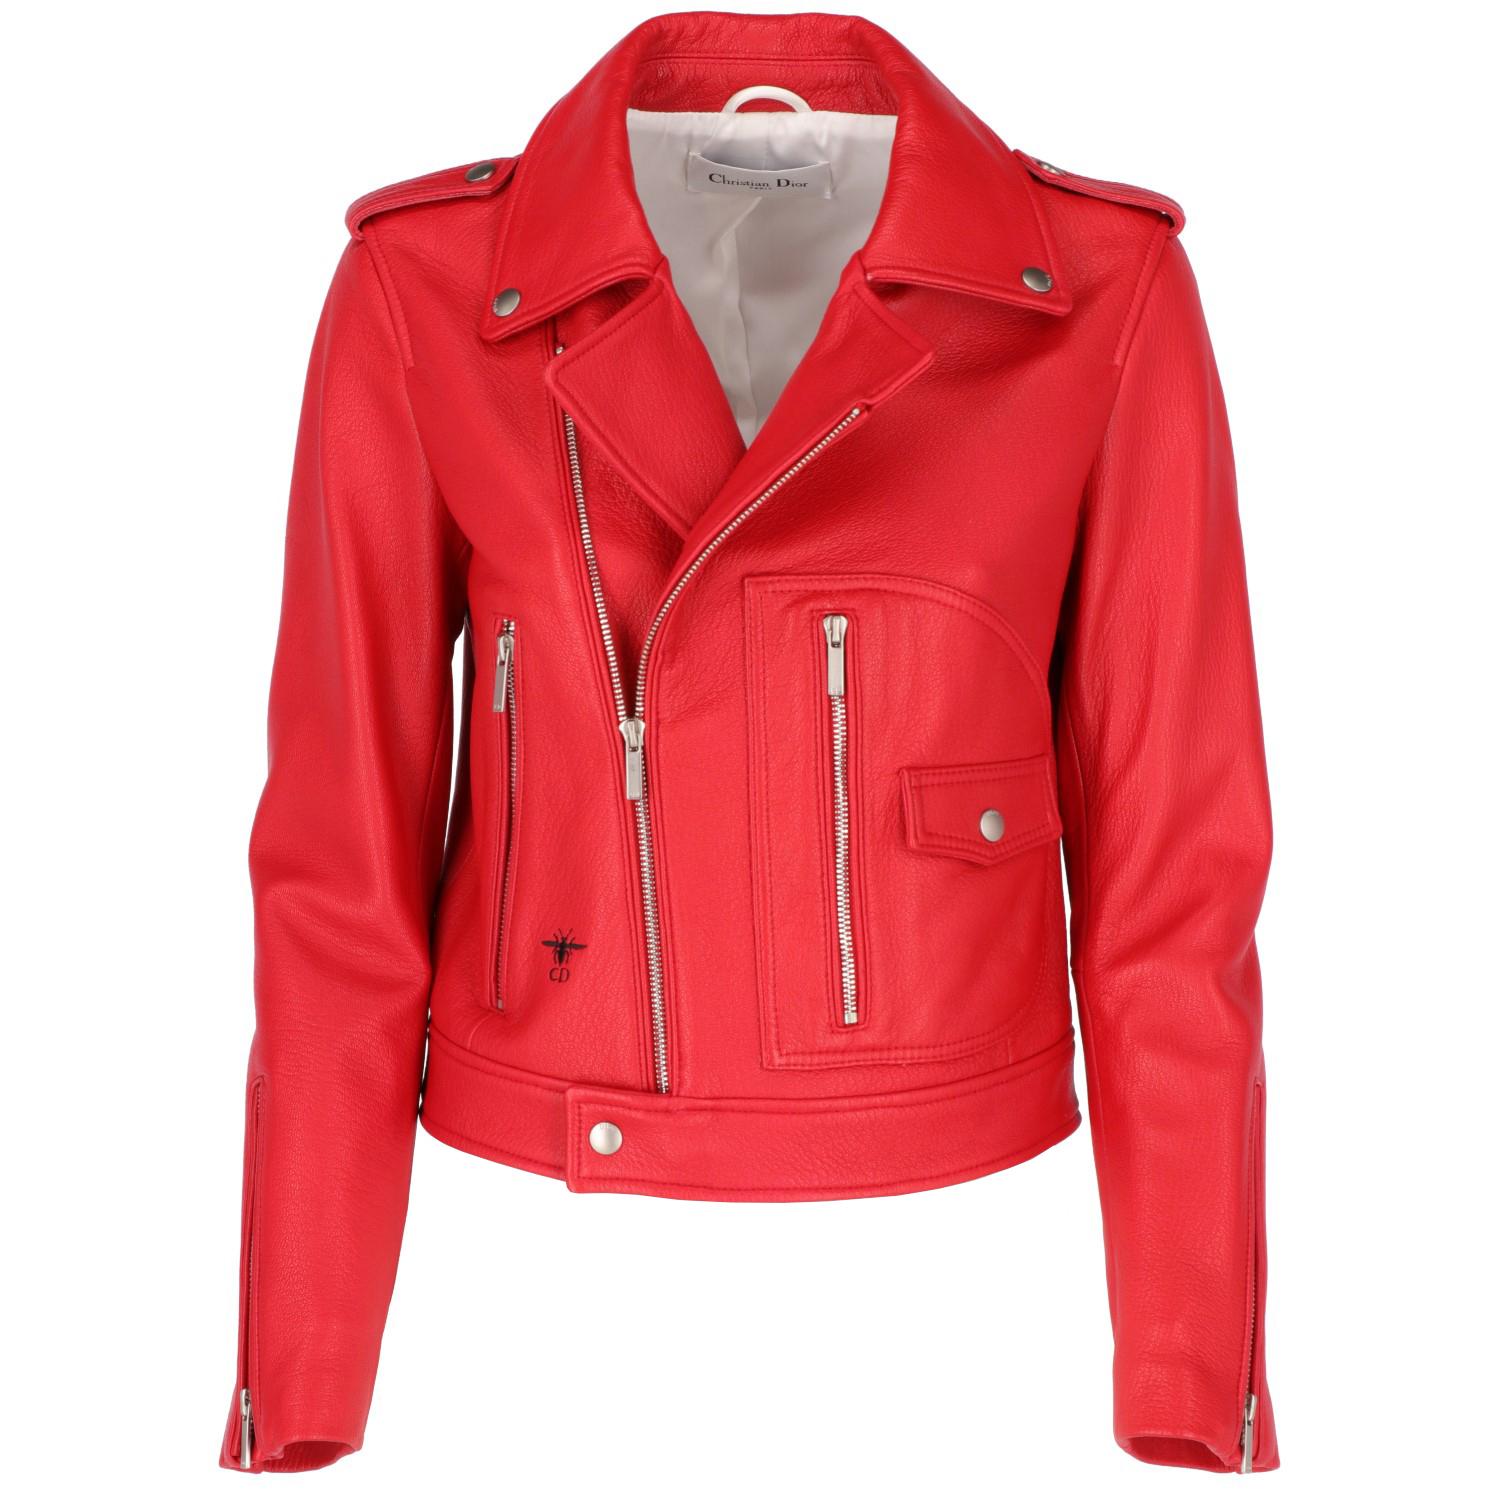 Christian Dior red leather biker jacket, 100% sheep leather, featuring press buttons with 